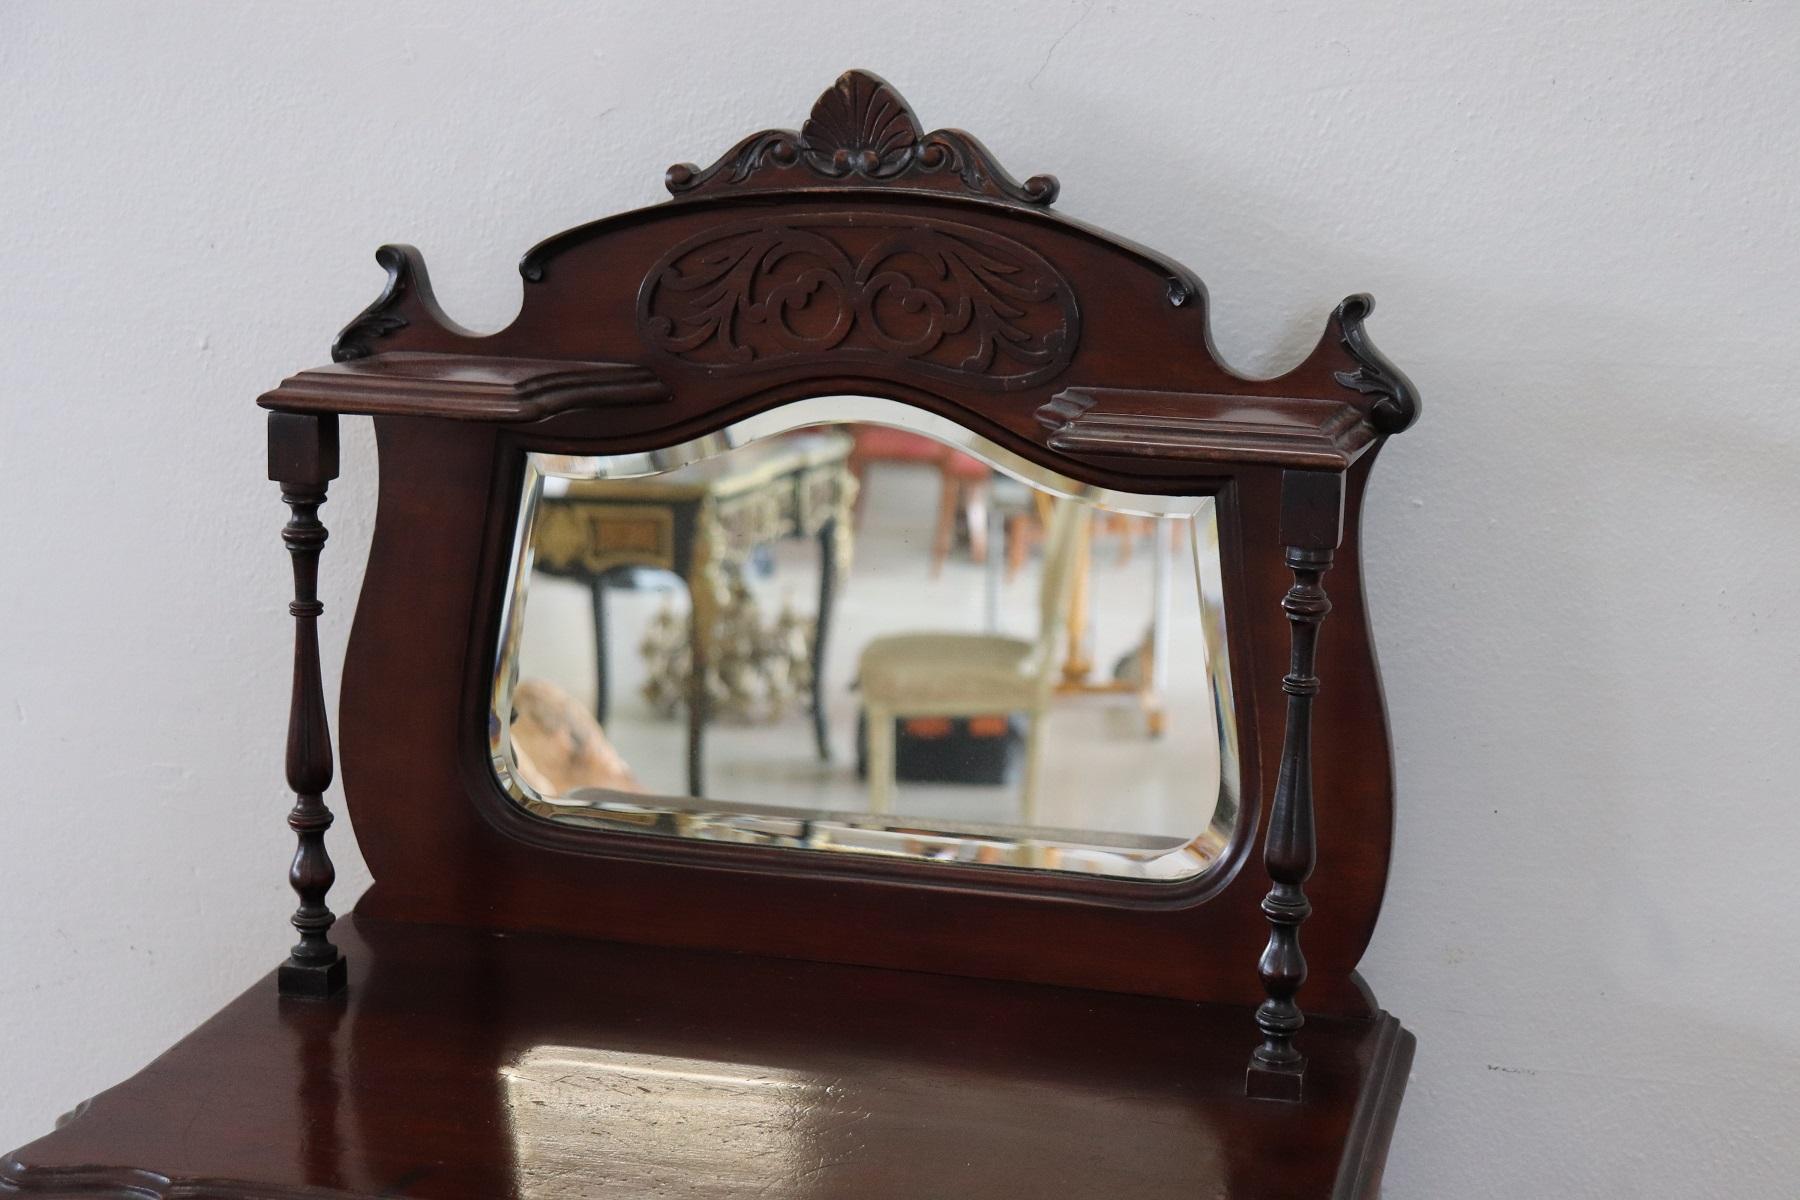 Antique English Vitrine 1880s in mahogany wood. Important mahogany wood carving with decorations moved. Perfect for displaying your collection of small precious objects. Finely chiseled gilded bronze handles. A comfortable drawer. Particular mirror